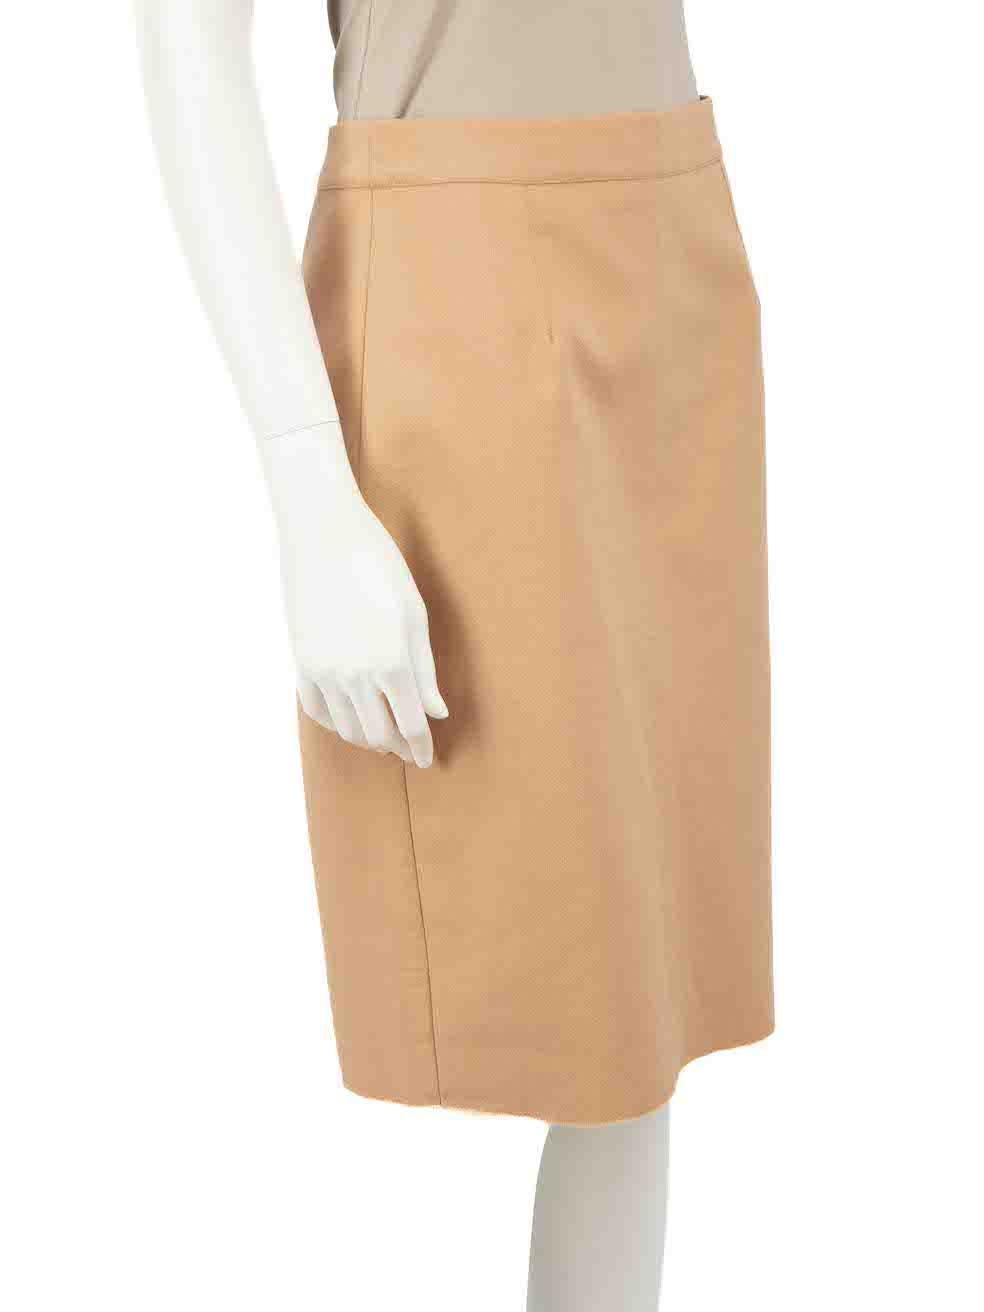 CONDITION is Very good. Minimal wear to skirt is evident. Minimal wear to the front with plucks to the weave on this used Lanvin designer resale item.
 
 
 
 Details
 
 
 Beige
 
 Cotton
 
 Pencil skirt
 
 Knee length
 
 Figure hugging fit
 
 Raw